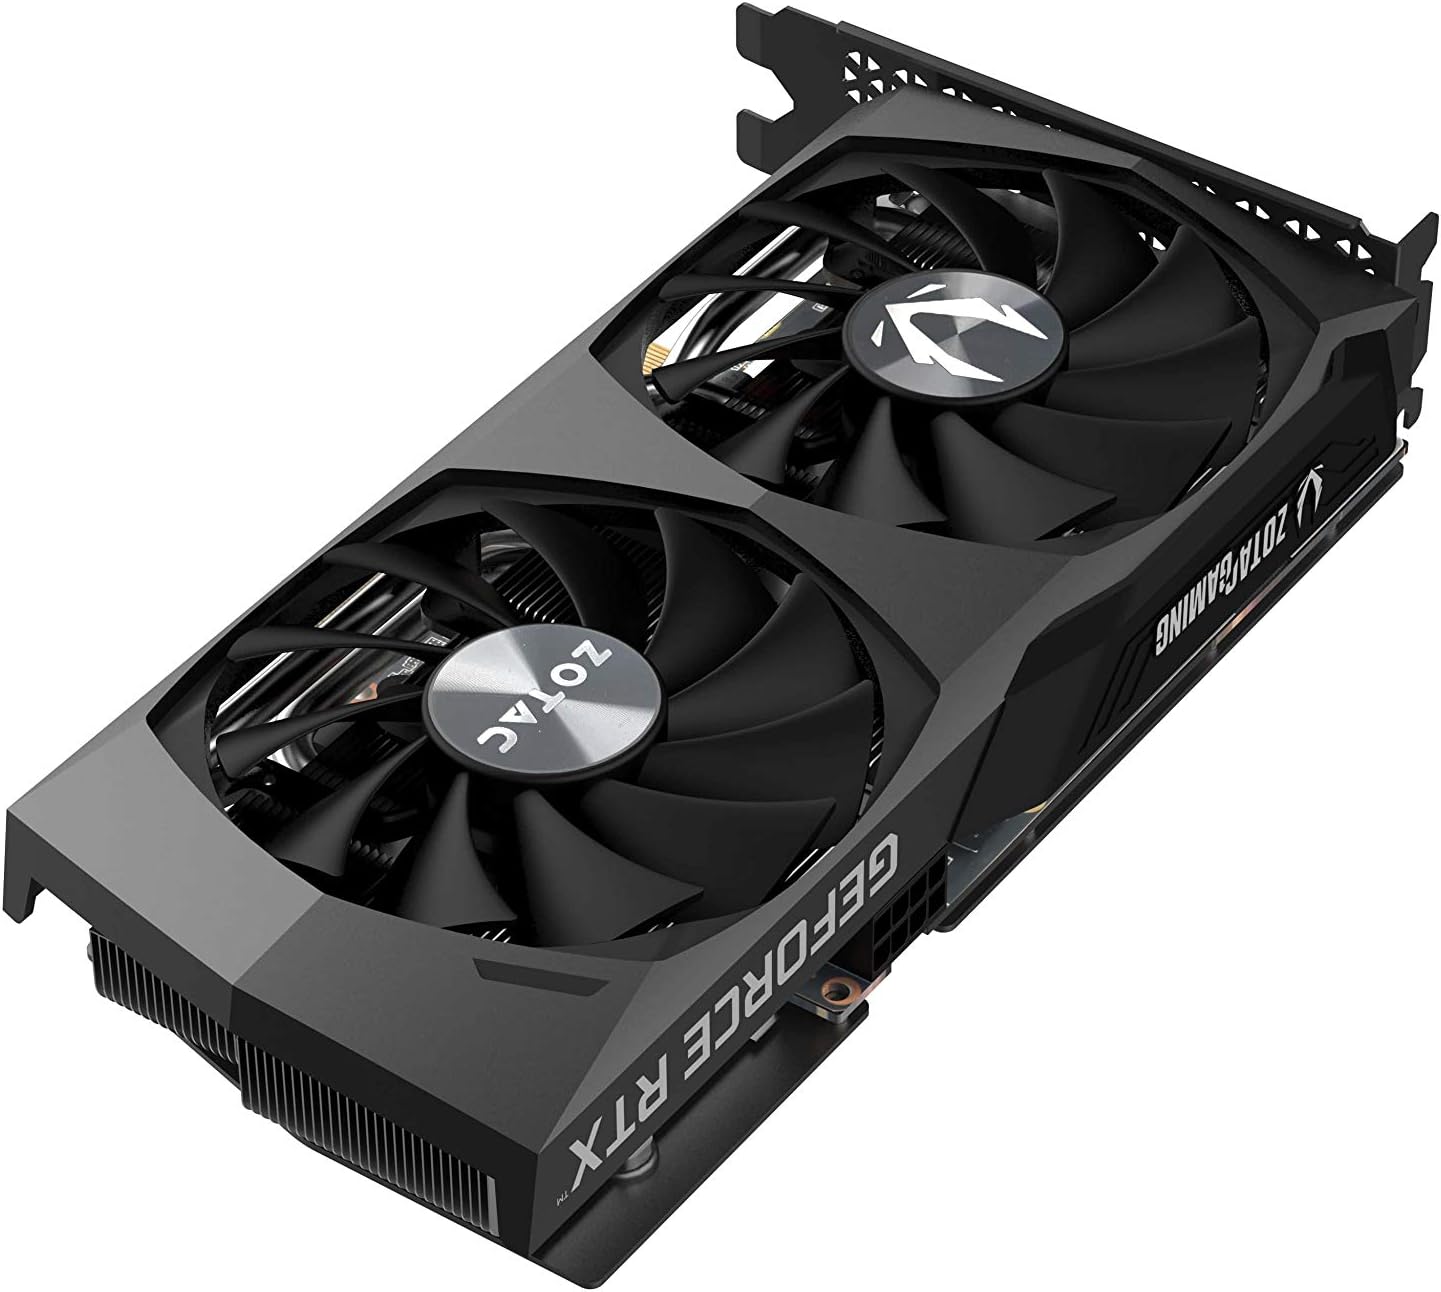 Comparing 5 Graphics Cards: RTX 3060 Twin Edge OC, Tbest 8MB, GT 730 Zone, Geforce 210, KAER GT 730